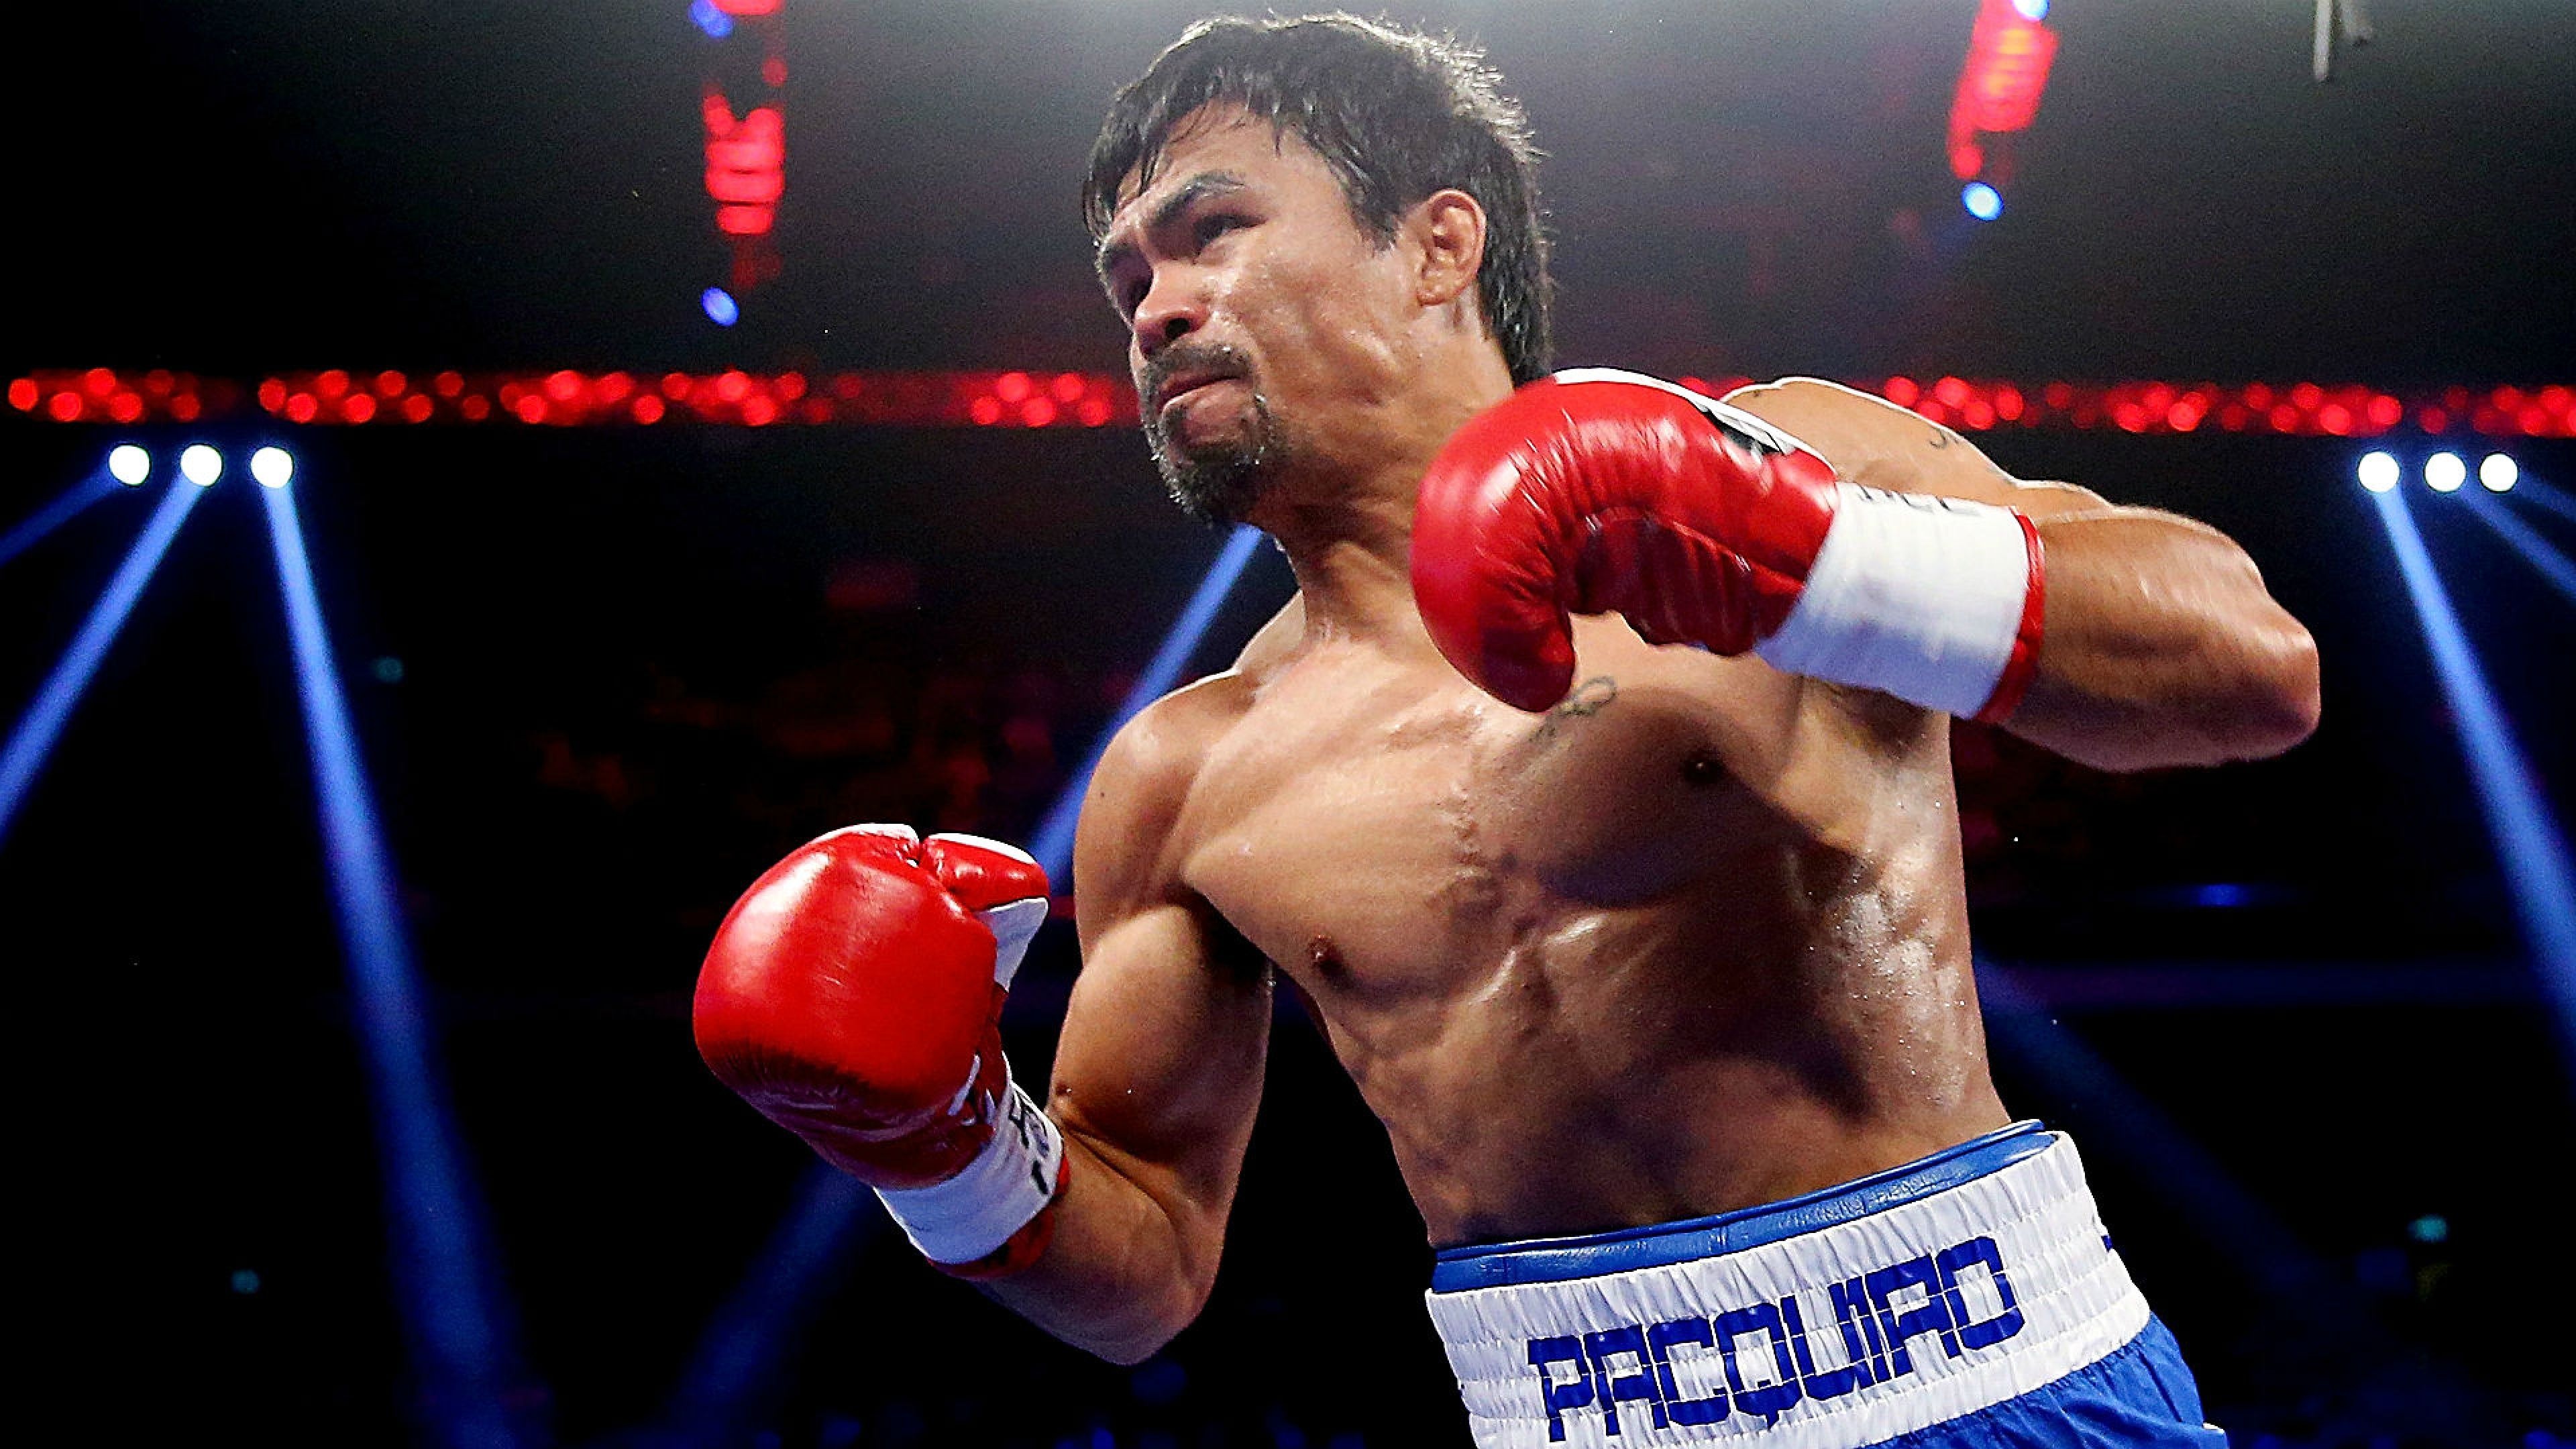 Manny Pacquiao wallpapers, Top-notch collection, Captivating backgrounds, Sports phenomenon, 3840x2160 4K Desktop